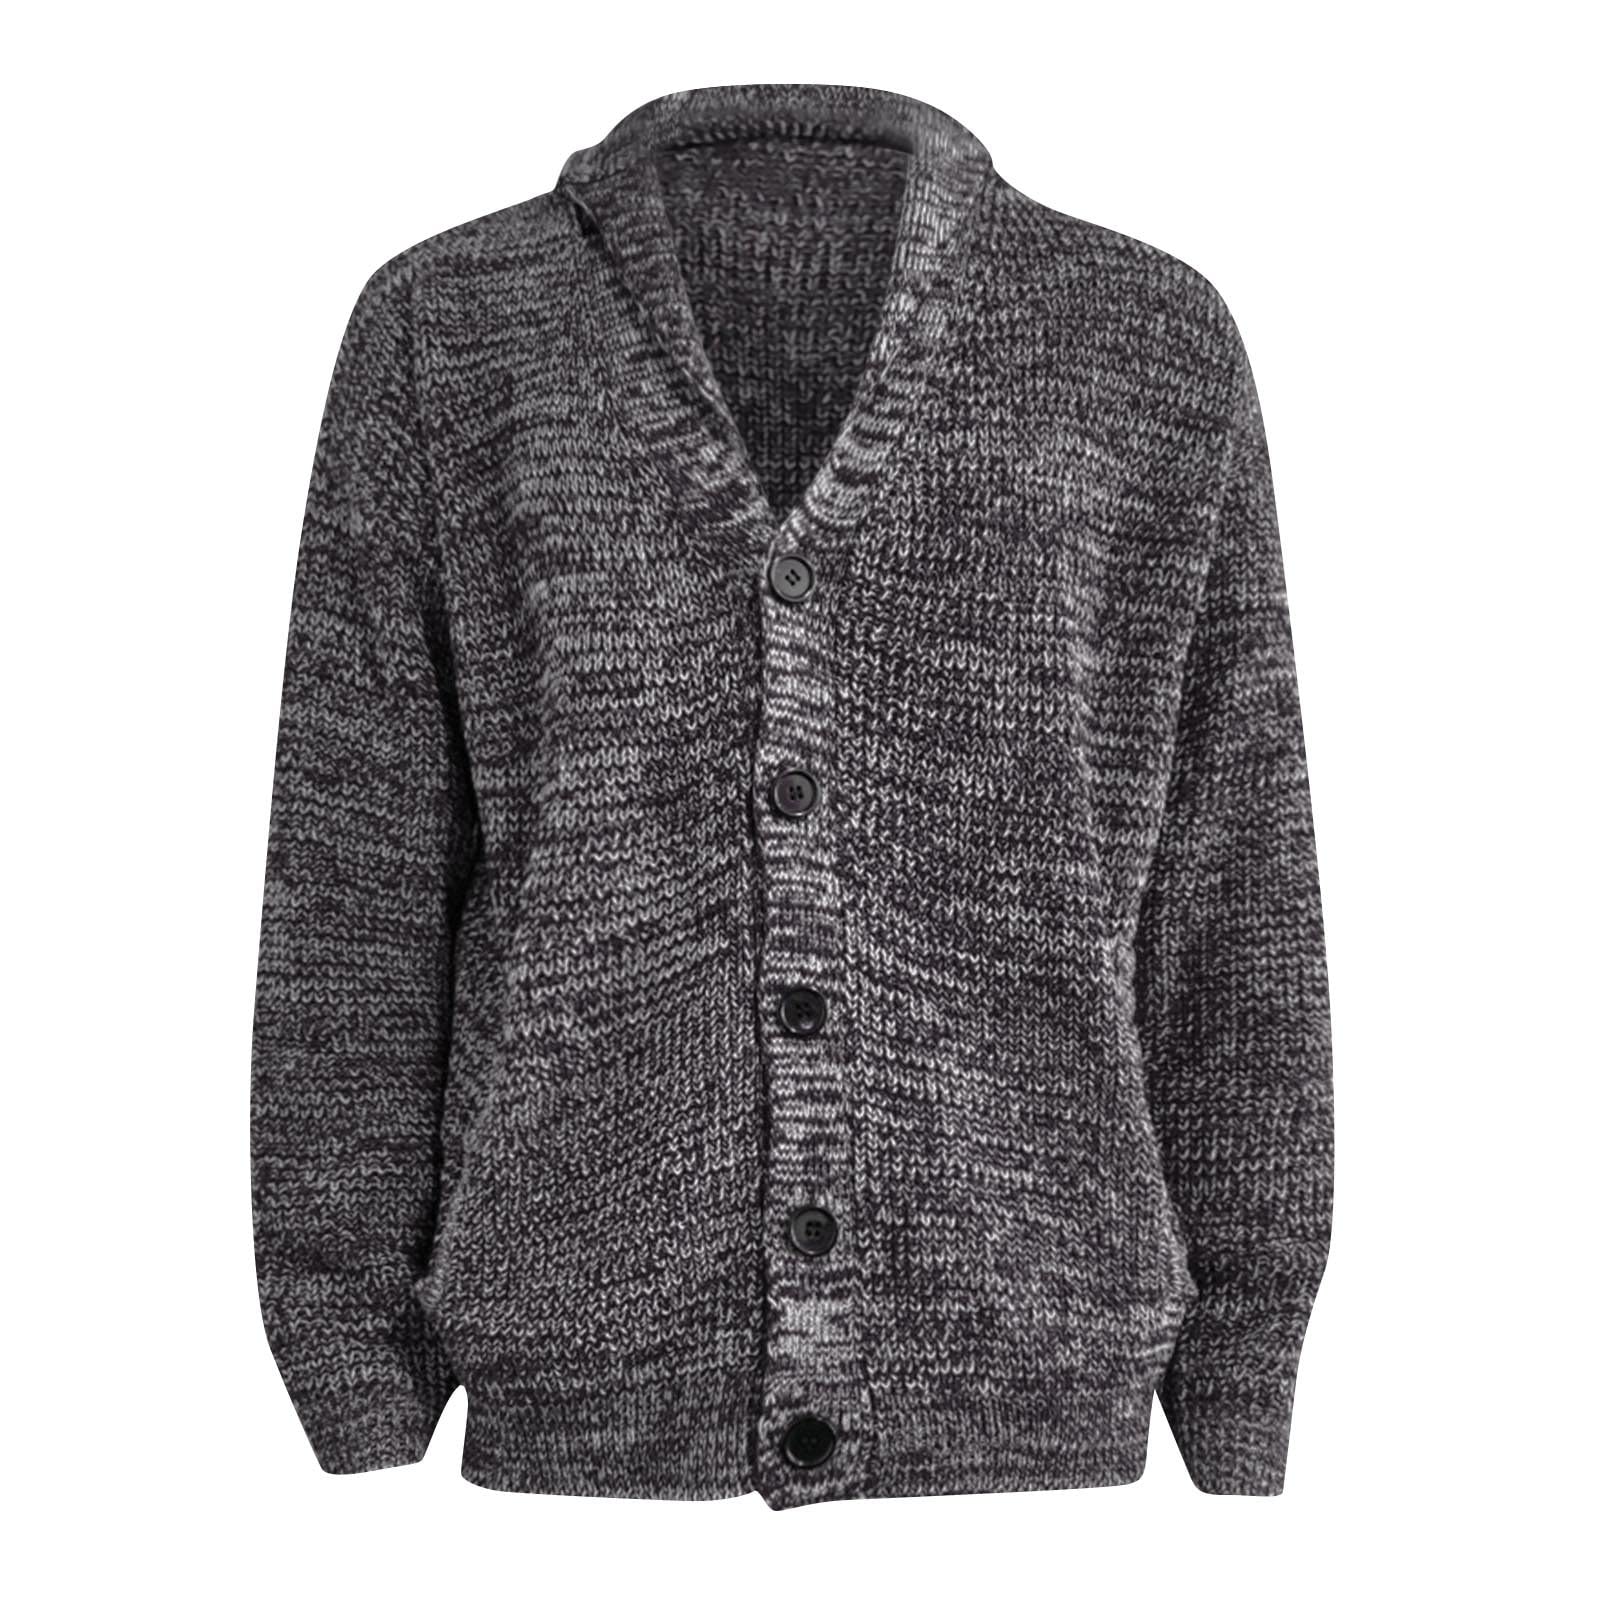 XIAXOGOOL Cardigan Mens Sweater Casual Stylish Shawl Collar Cardigan Cable Knitted Button Up Cardigan Sweaters